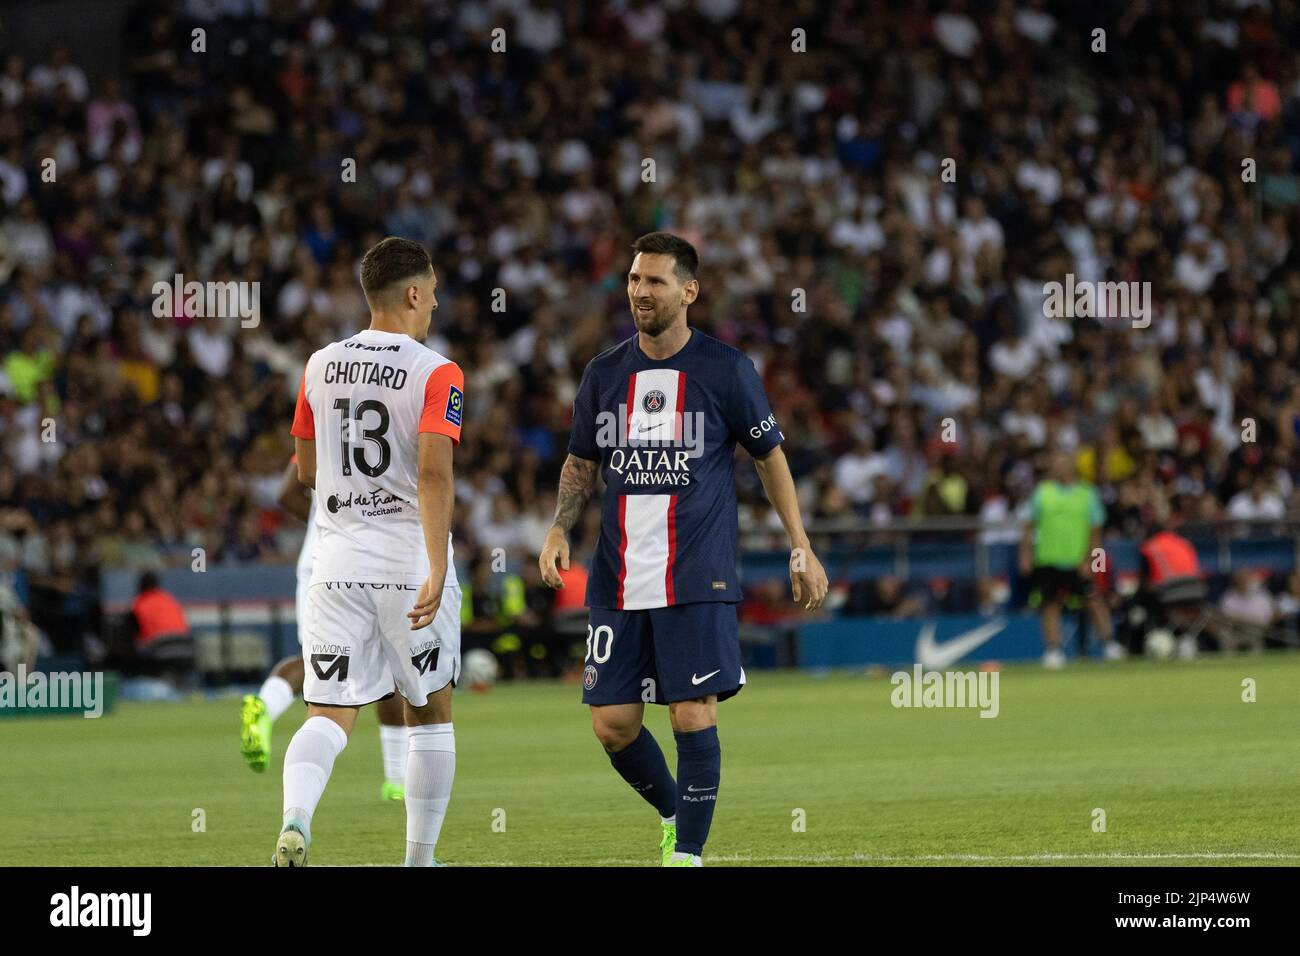 The player Lionel Messi facing another player from Montpellier Stock Photo